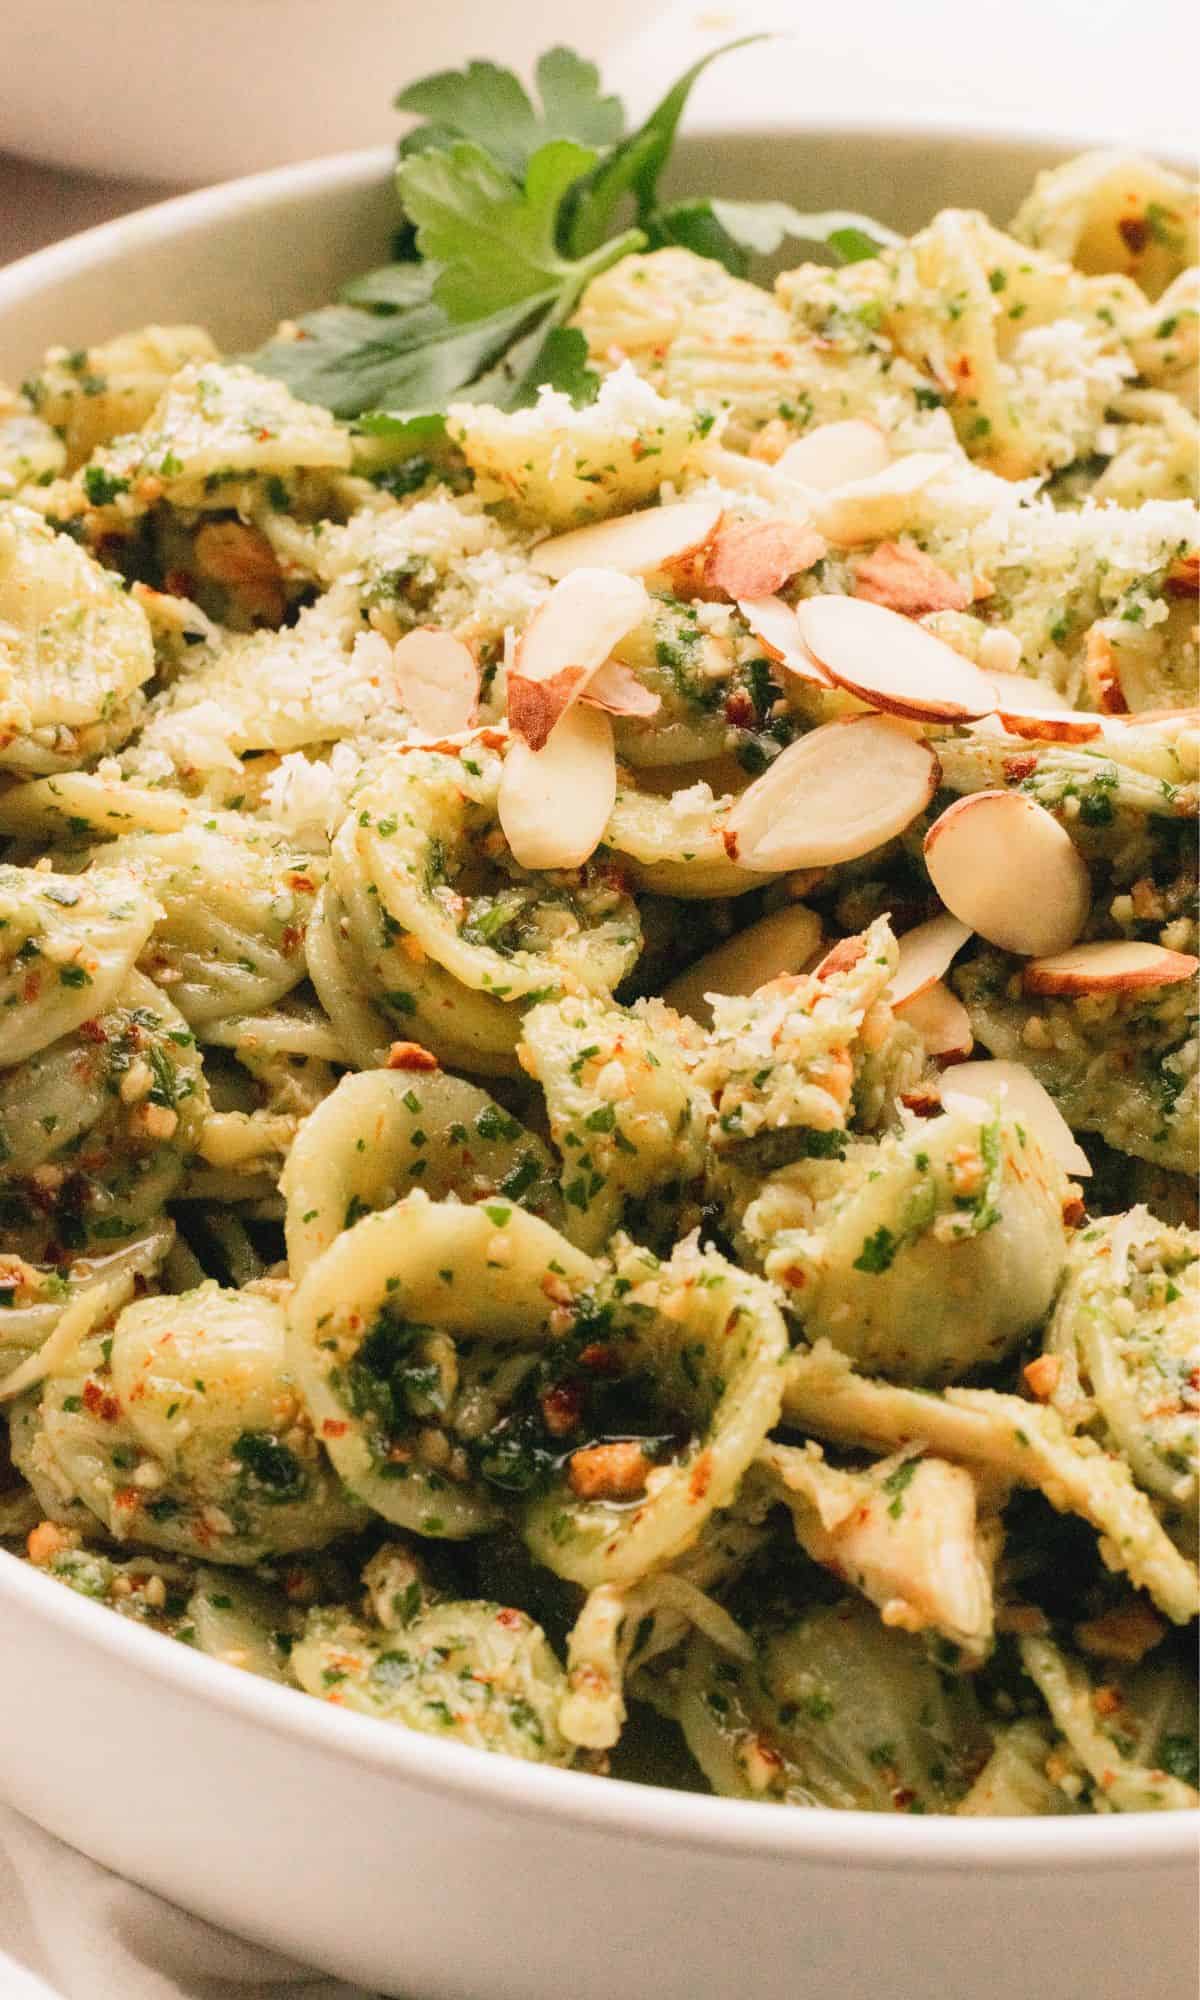 Parlsey pesto pasta in white bowl topped with almonds.